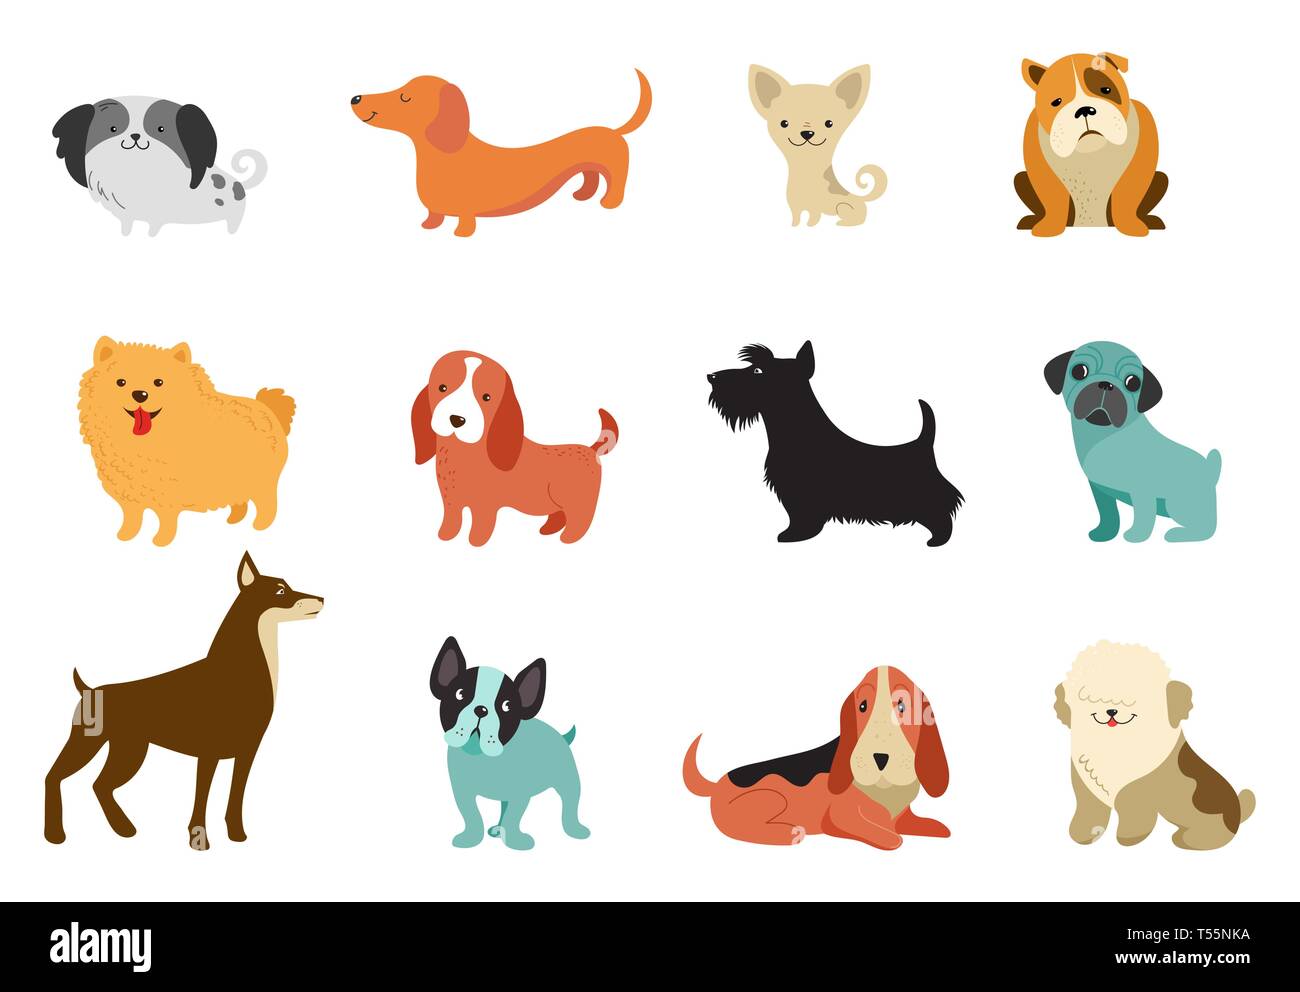 Dogs - collection of vector illustrations. Funny cartoons, different dog breeds, flat style Stock Vector